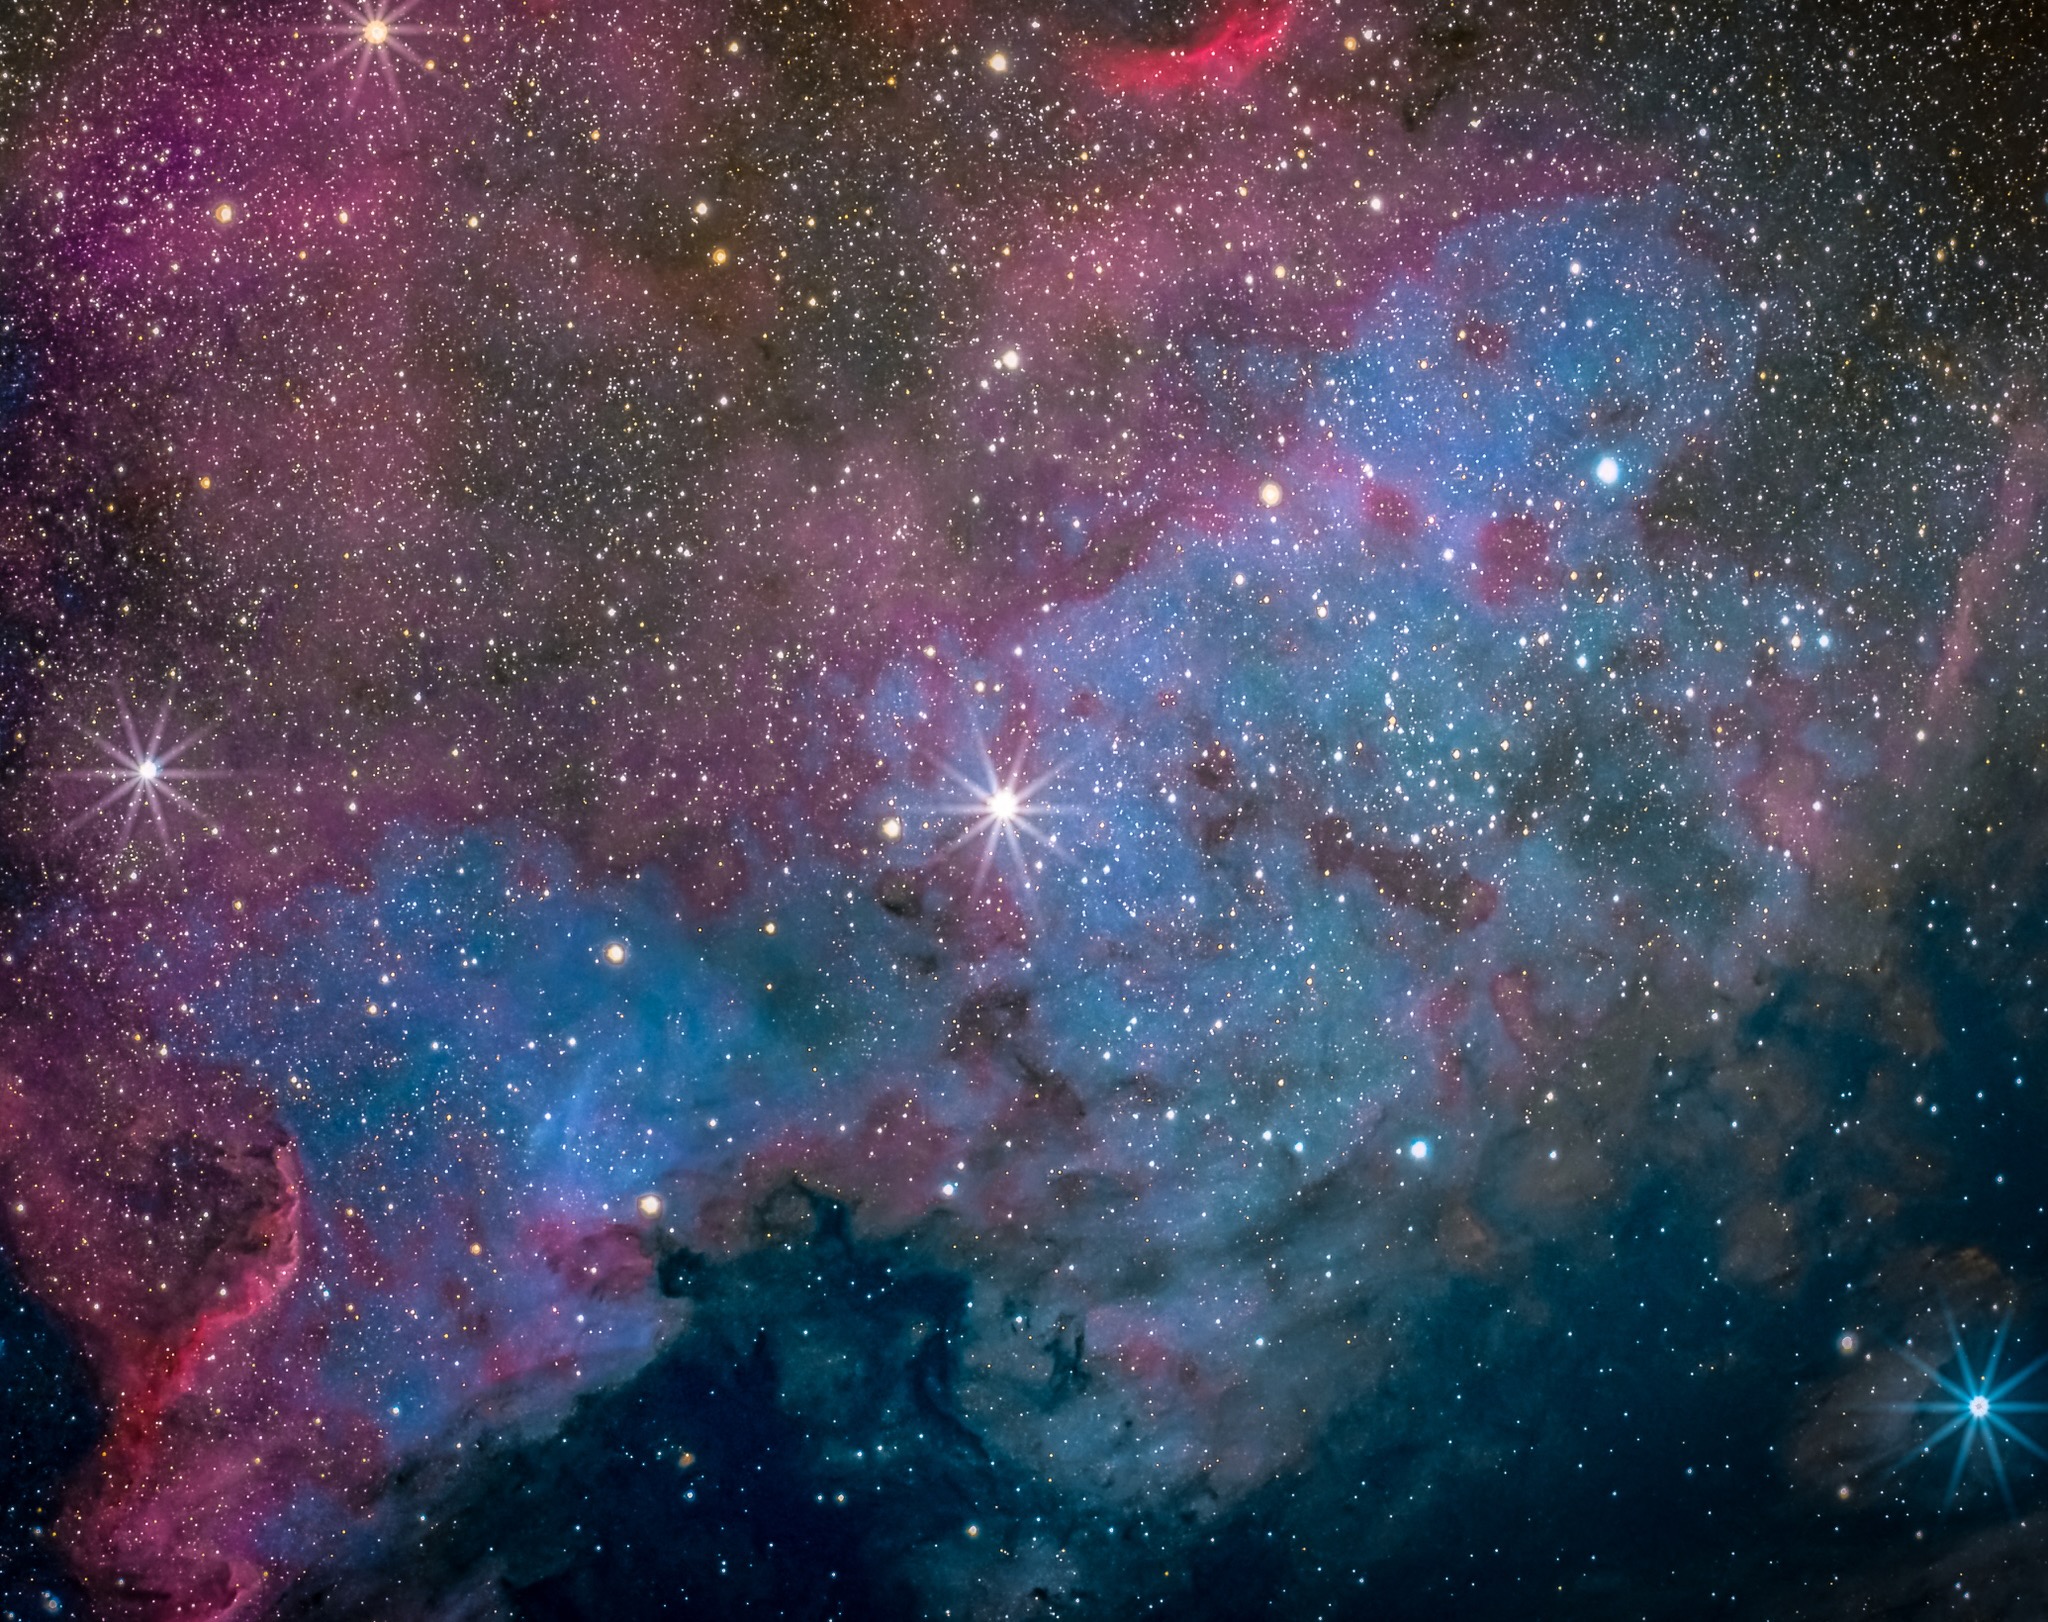 More a photographer’s dream shot than a visual treat, this is North America Nebula. The glowing gases and dark nebulae resembles the North American continent almost explicitly. Visually it can be spied through binoculars under a dark sky with averted vision, standing out as an enhanced region in the Milky Way.